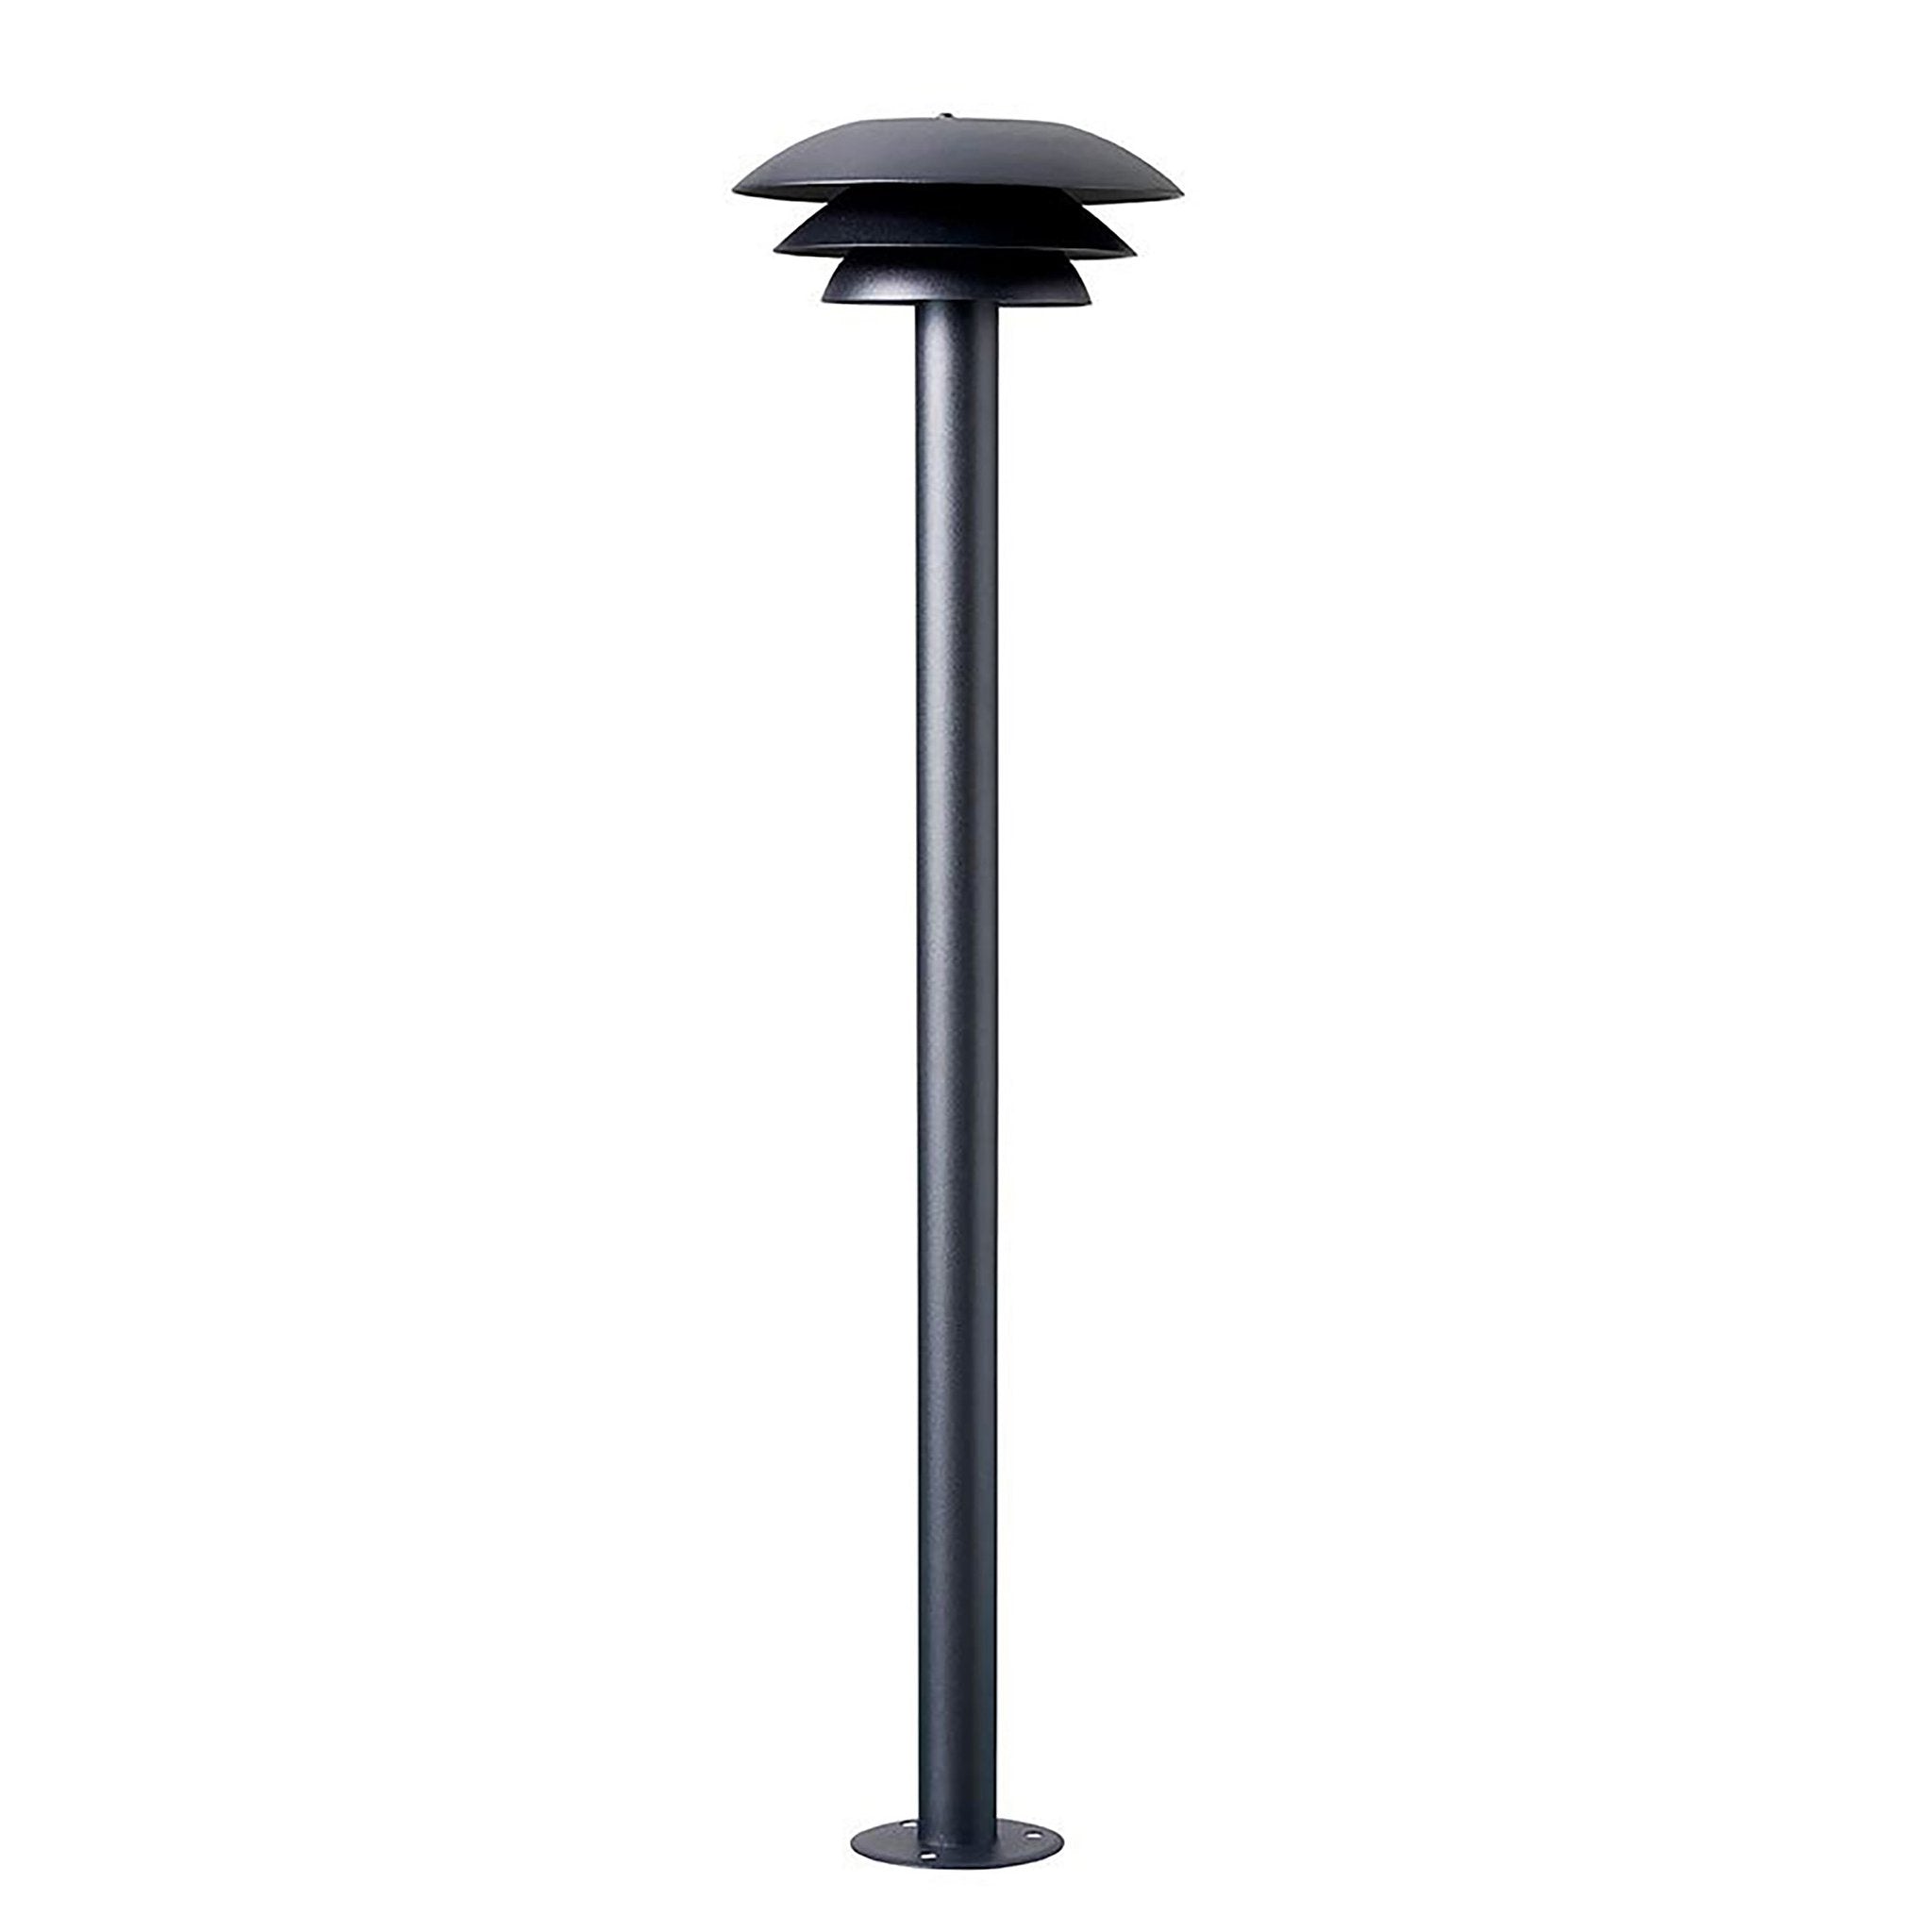 DL31 outdoor path lamp